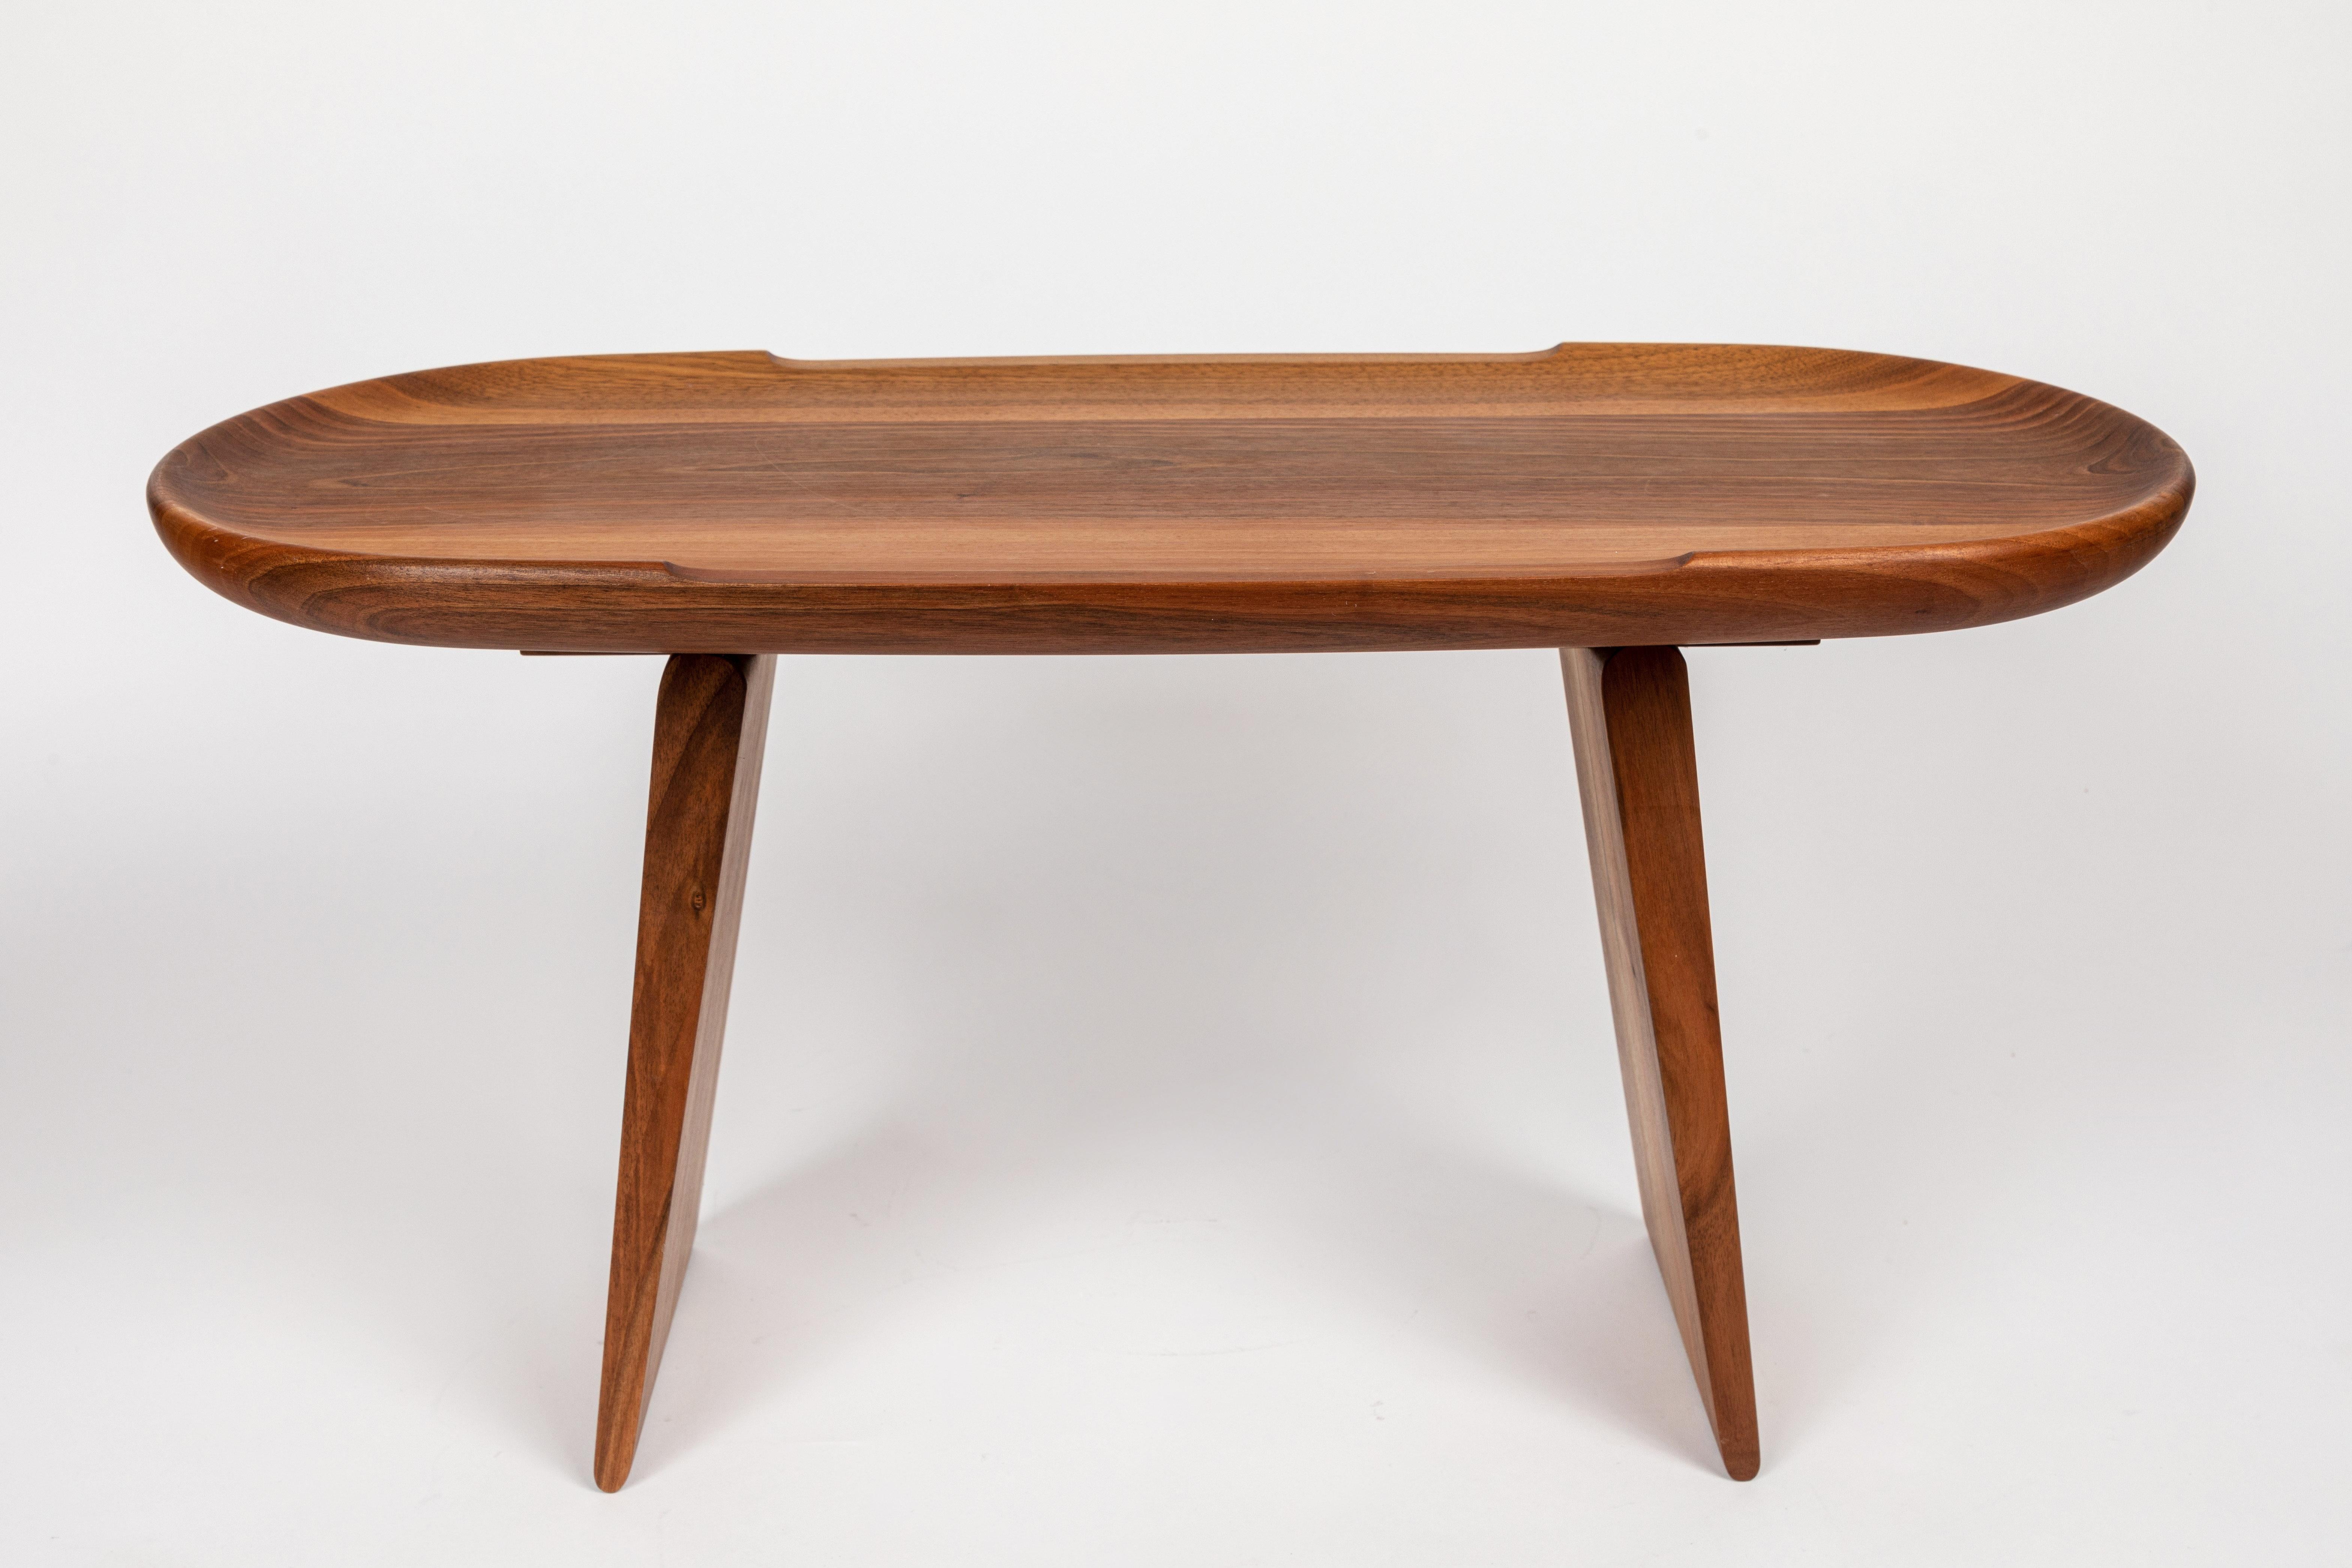 Carl Auböck Model #3511 walnut table. Designed in the 1950s, this incredibly refined and sculptural table is executed in beautifully grained walnut. Reminiscent of the organic modern designs of George Nakashima, Pierre Chapo and Sori Yanagi.

Price